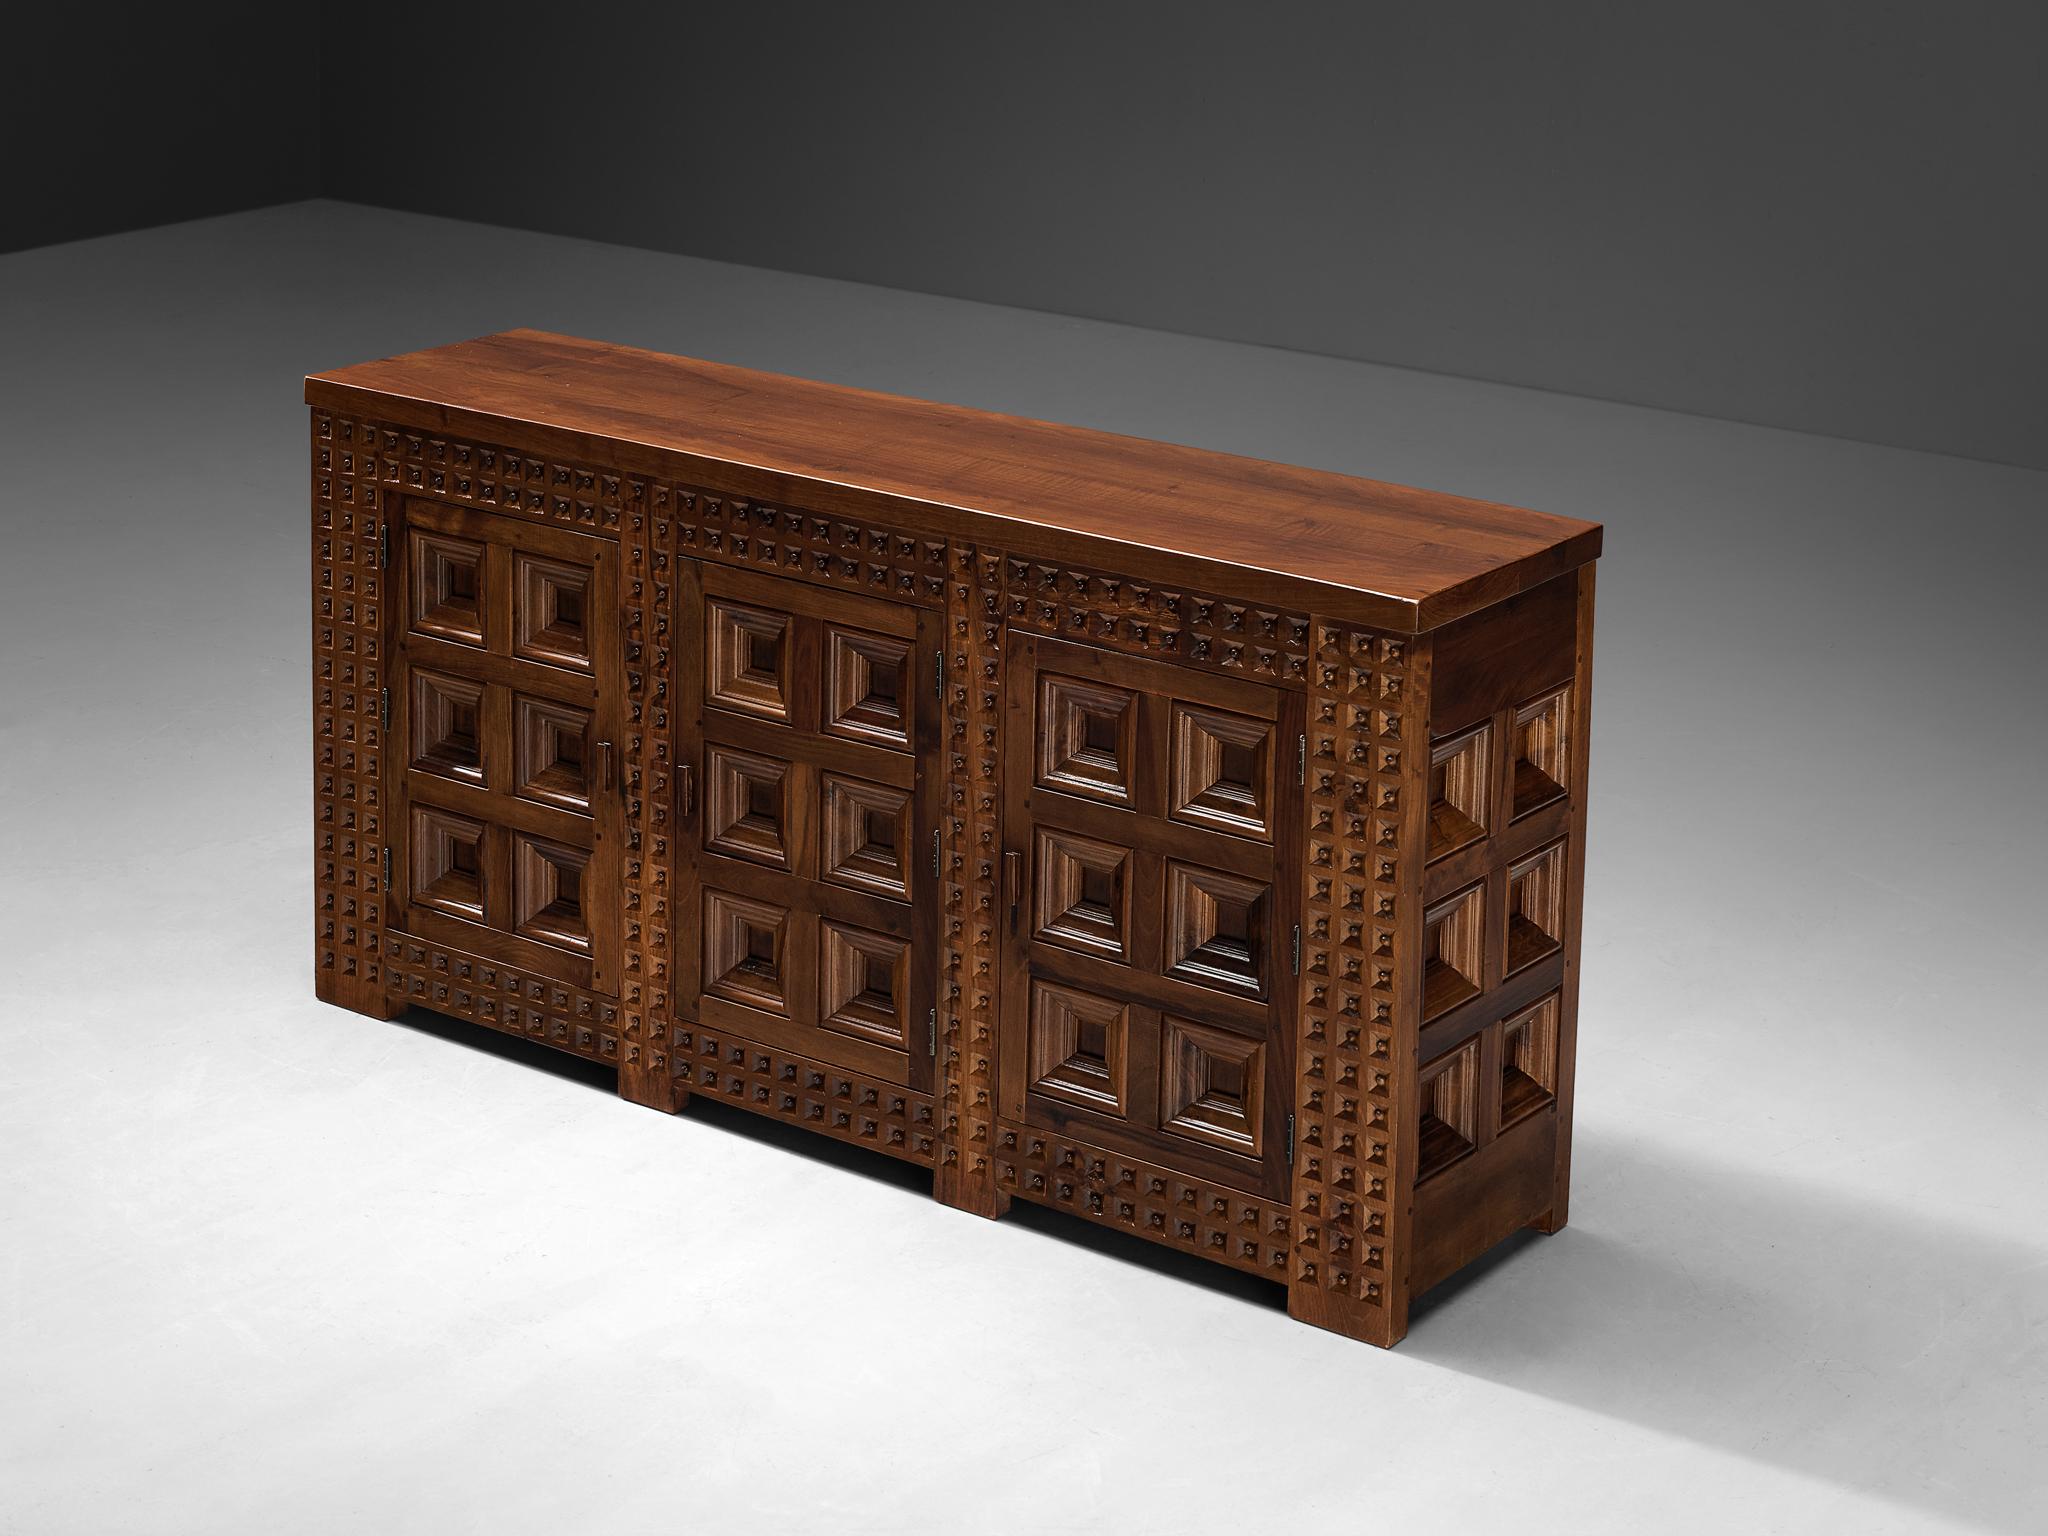 Sideboard, walnut, oak, Spain, 1960s 

This large cabinet originates from Spain and stylistically refers to the late 19th century Revival period. The embossed front is characterized by relief carvings with clearly defined squares. Its decorative